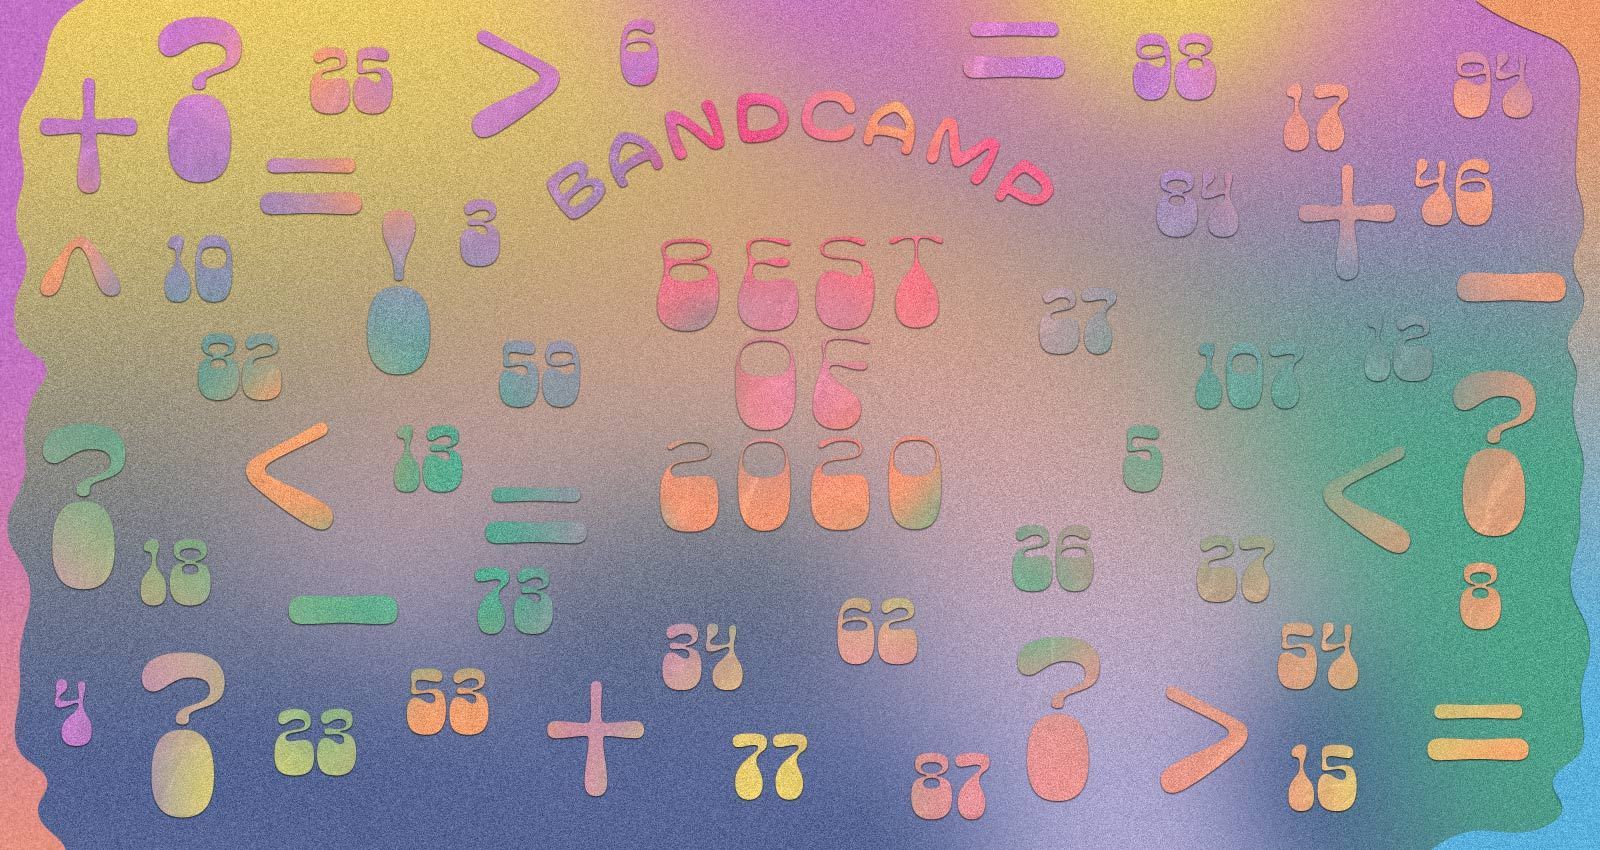 Bandcamp Reimagines The End Of Year List